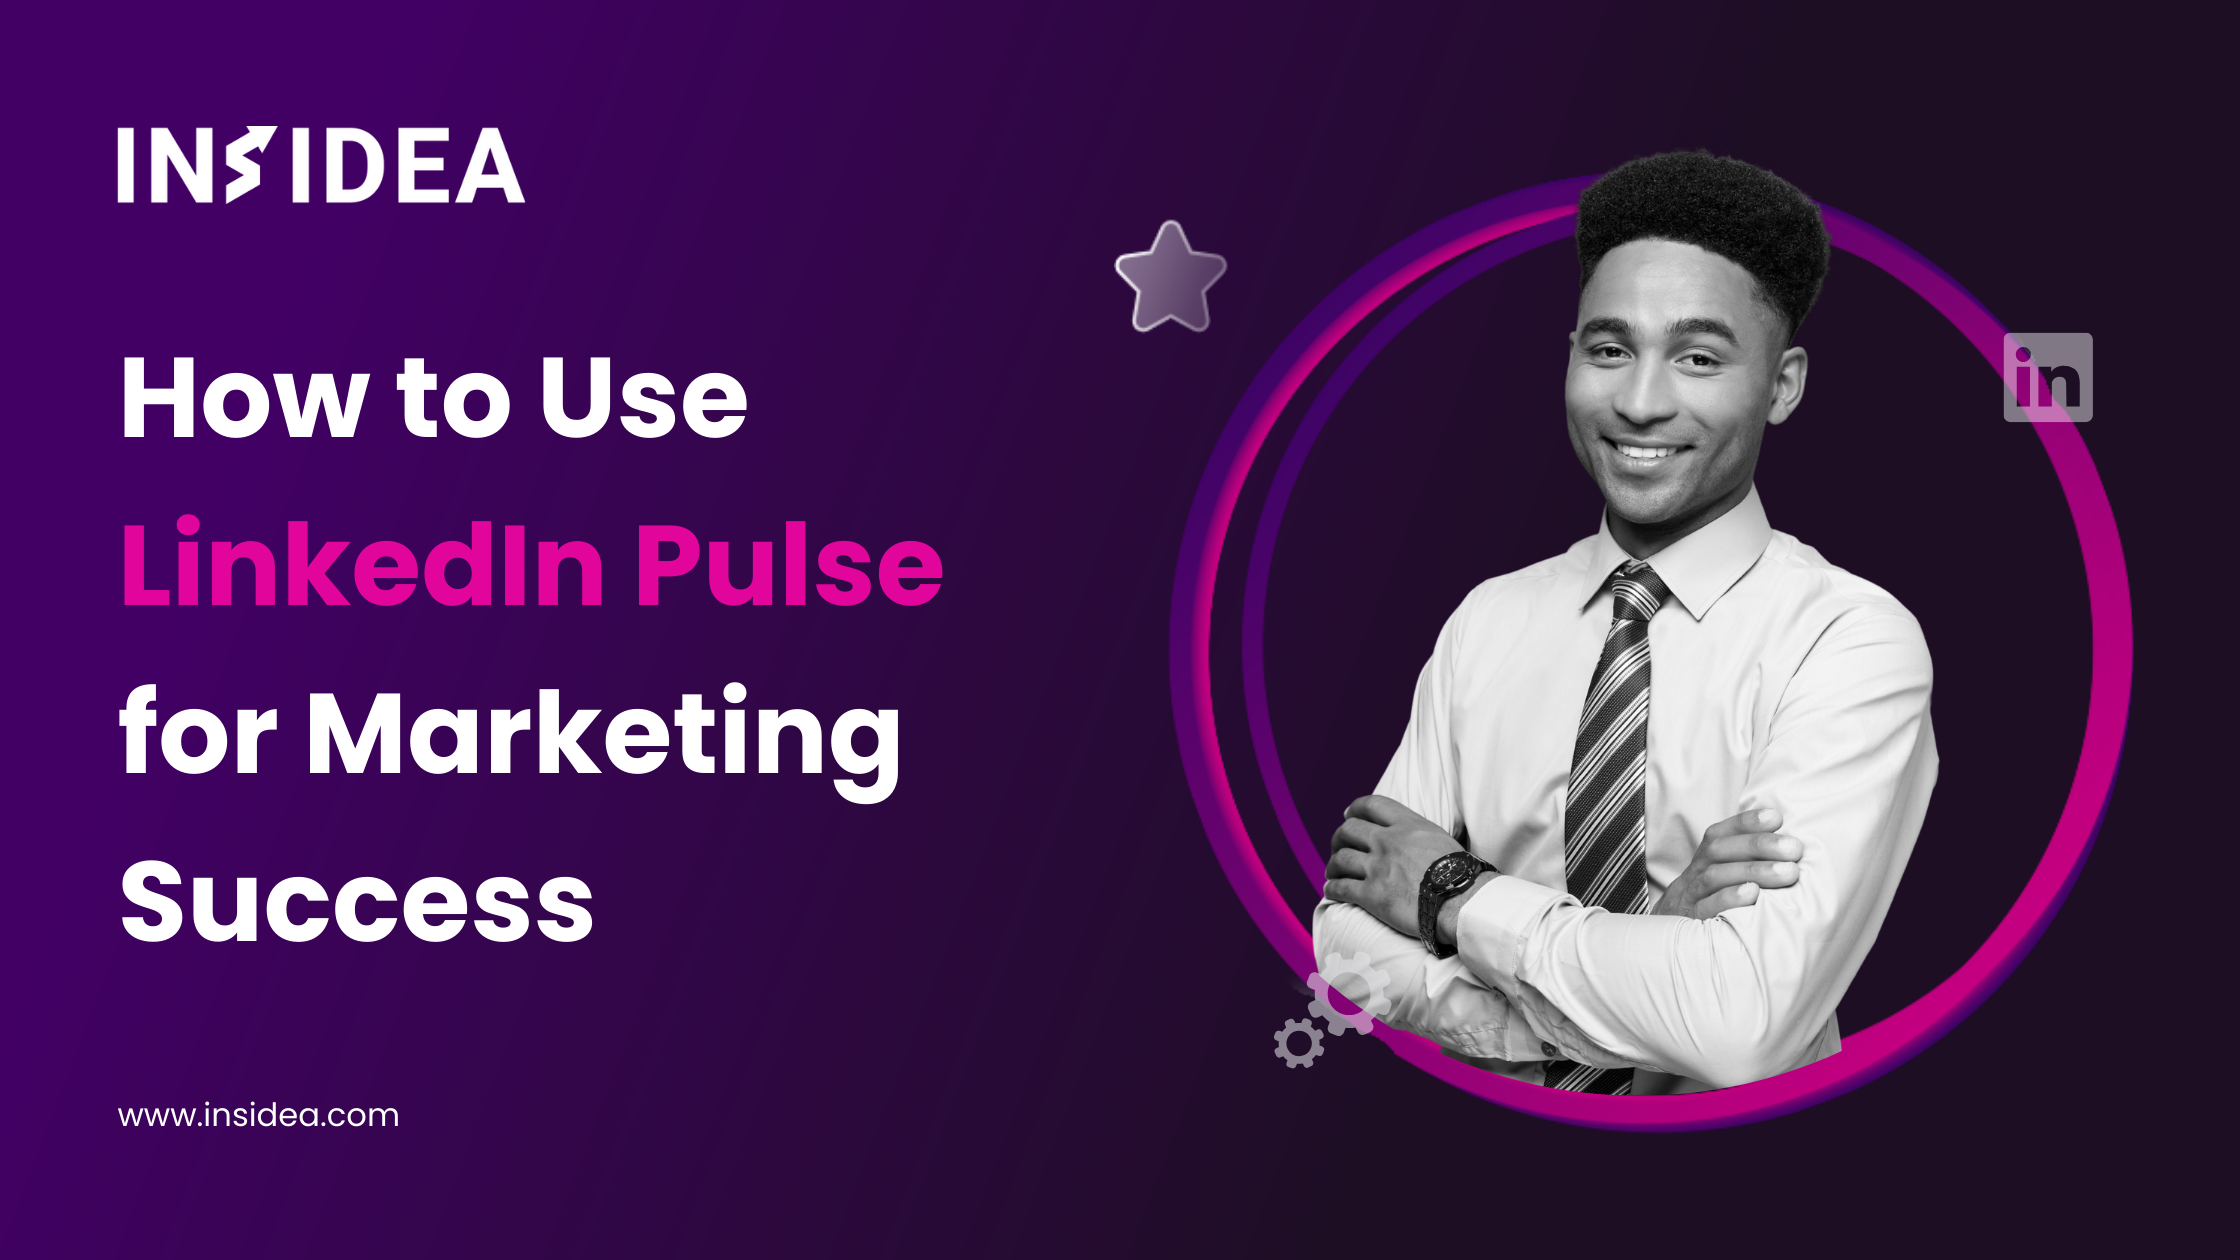 How to Use LinkedIn Pulse for Marketing Success